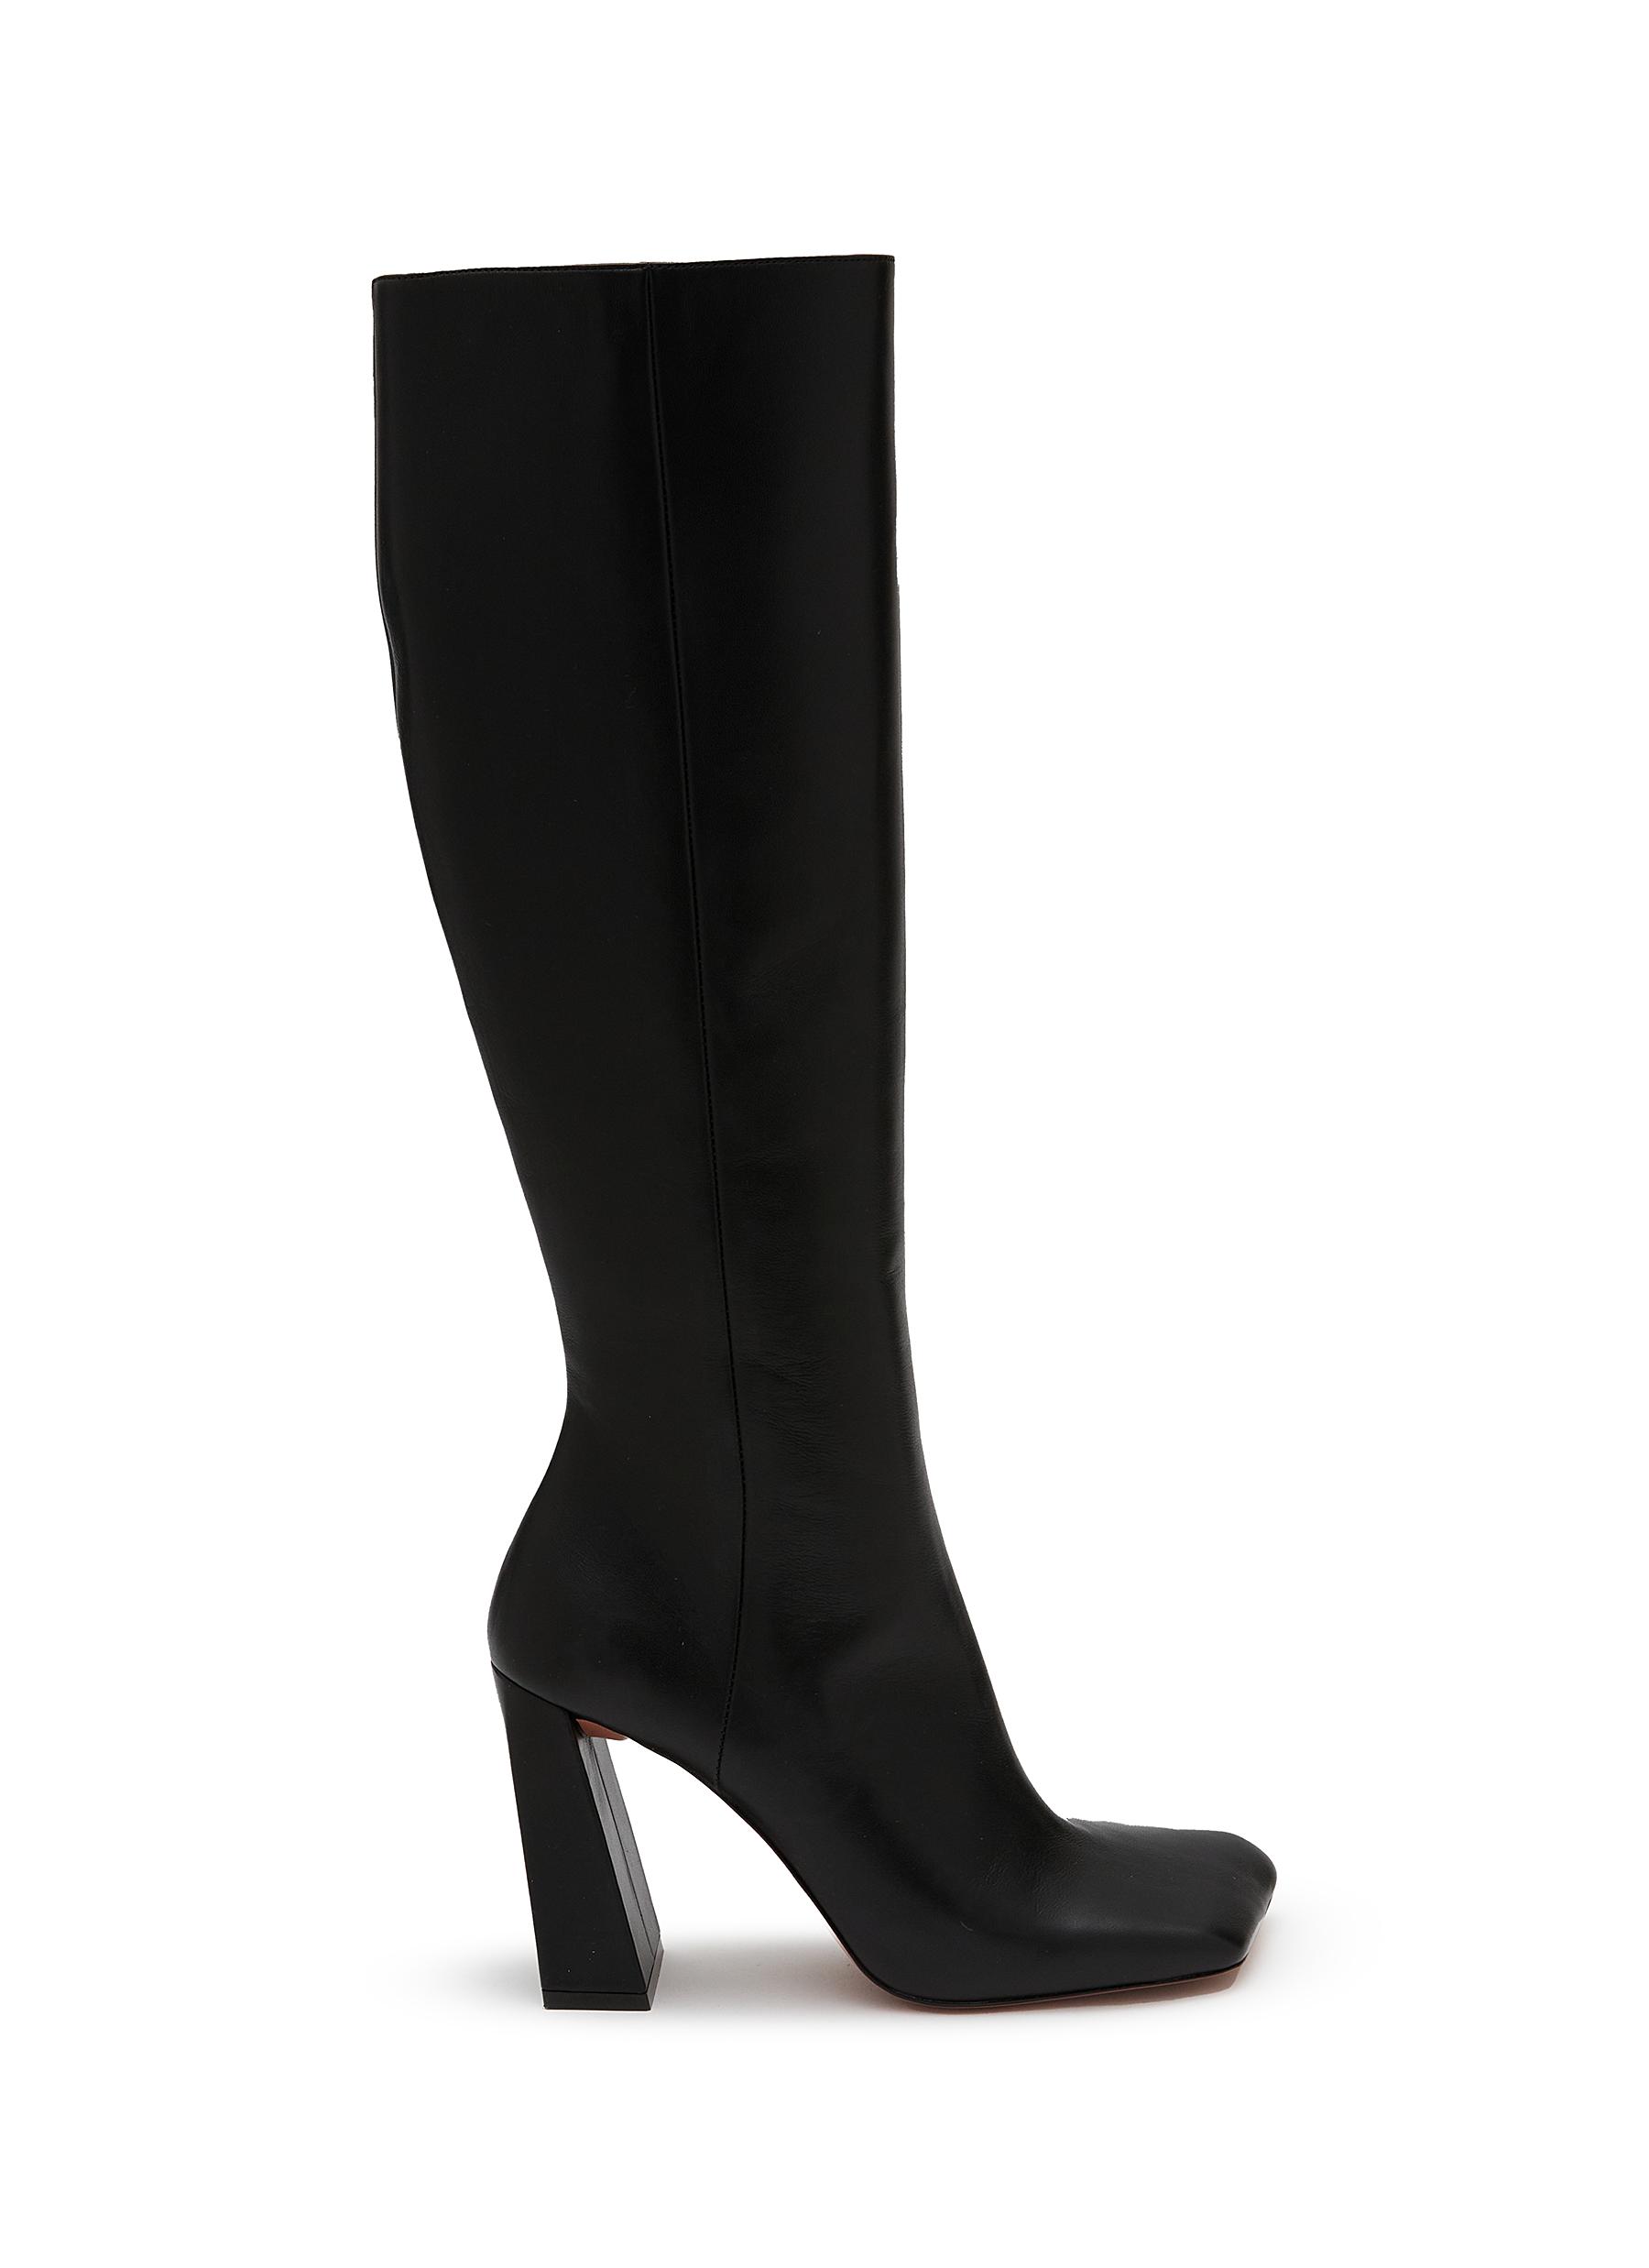 Marine 95 Leather Knee High Boots